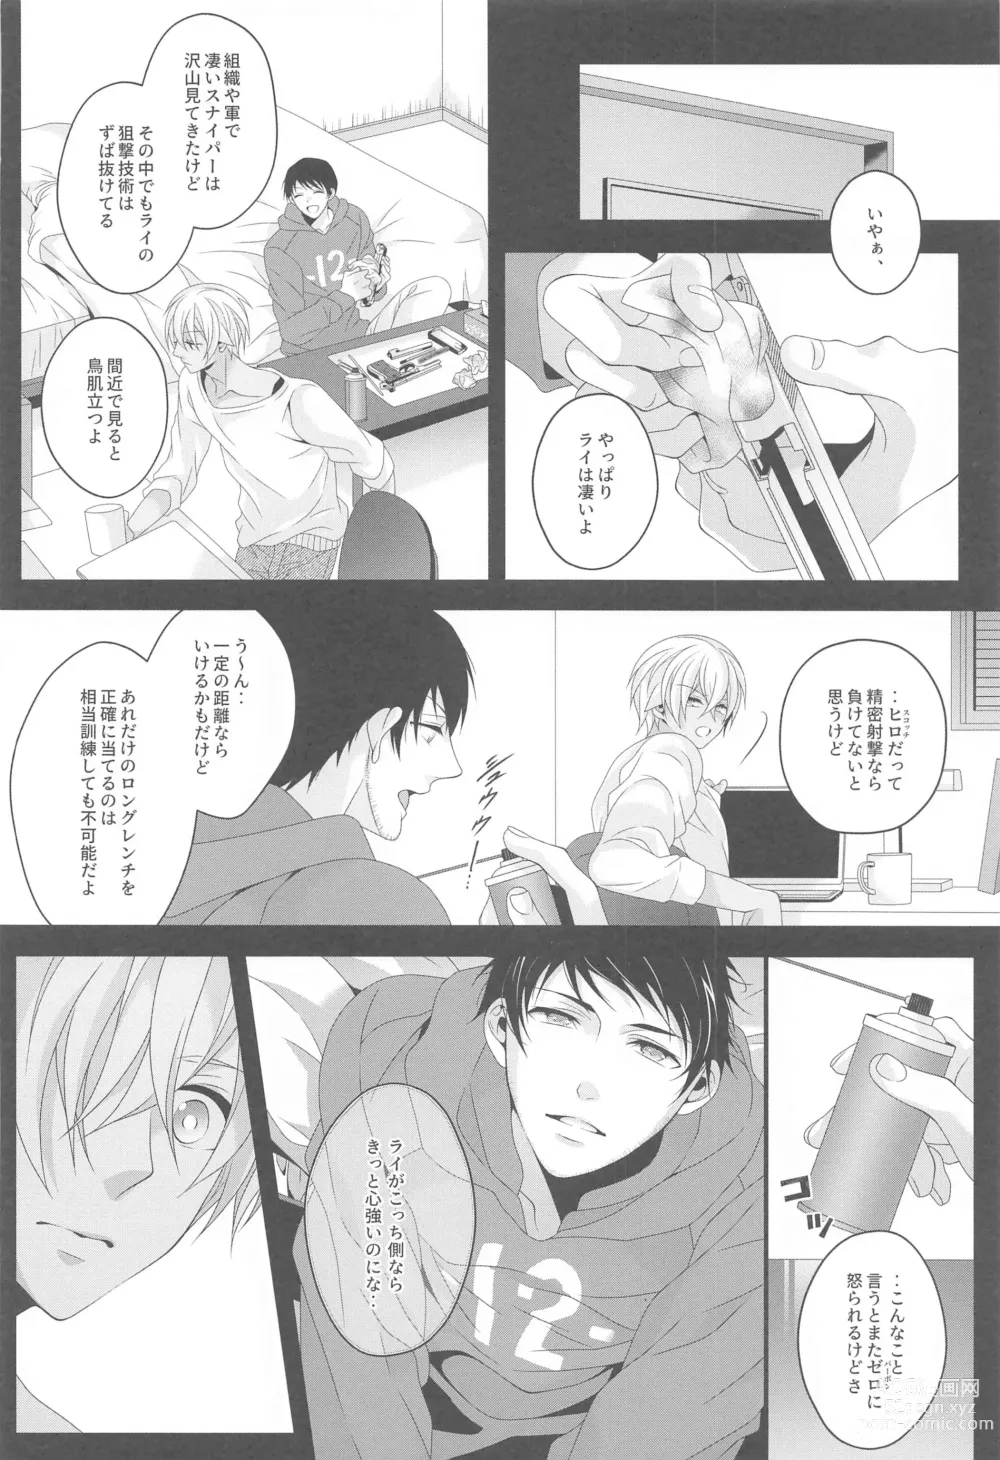 Page 23 of doujinshi Aibetsuriku no Yosame - A rainy night the pain of separation from loved ones